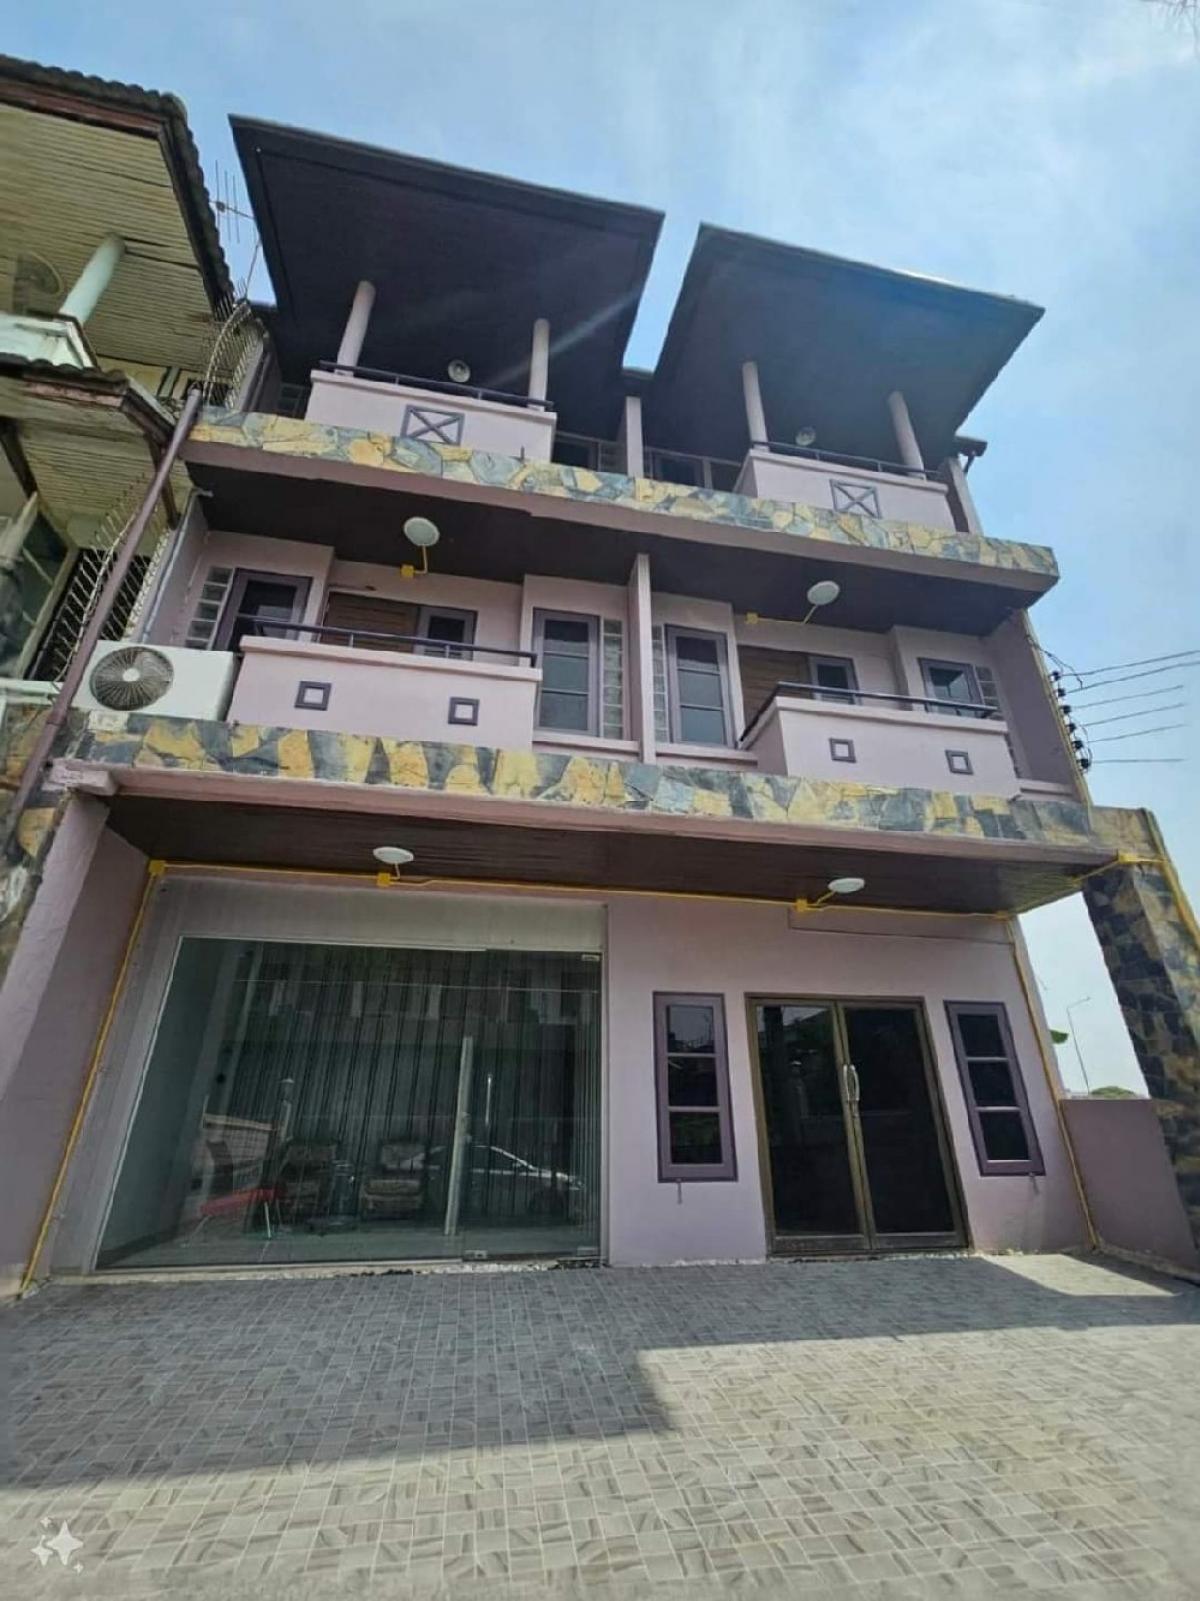 For RentHome OfficeMin Buri, Romklao : Home Office-Townhouse 3 Floor (corner) 2 units interconnected, for rent on Ramkhamhaeng Road 192. Go in 150 meters Near Kwan Riam Floating Market